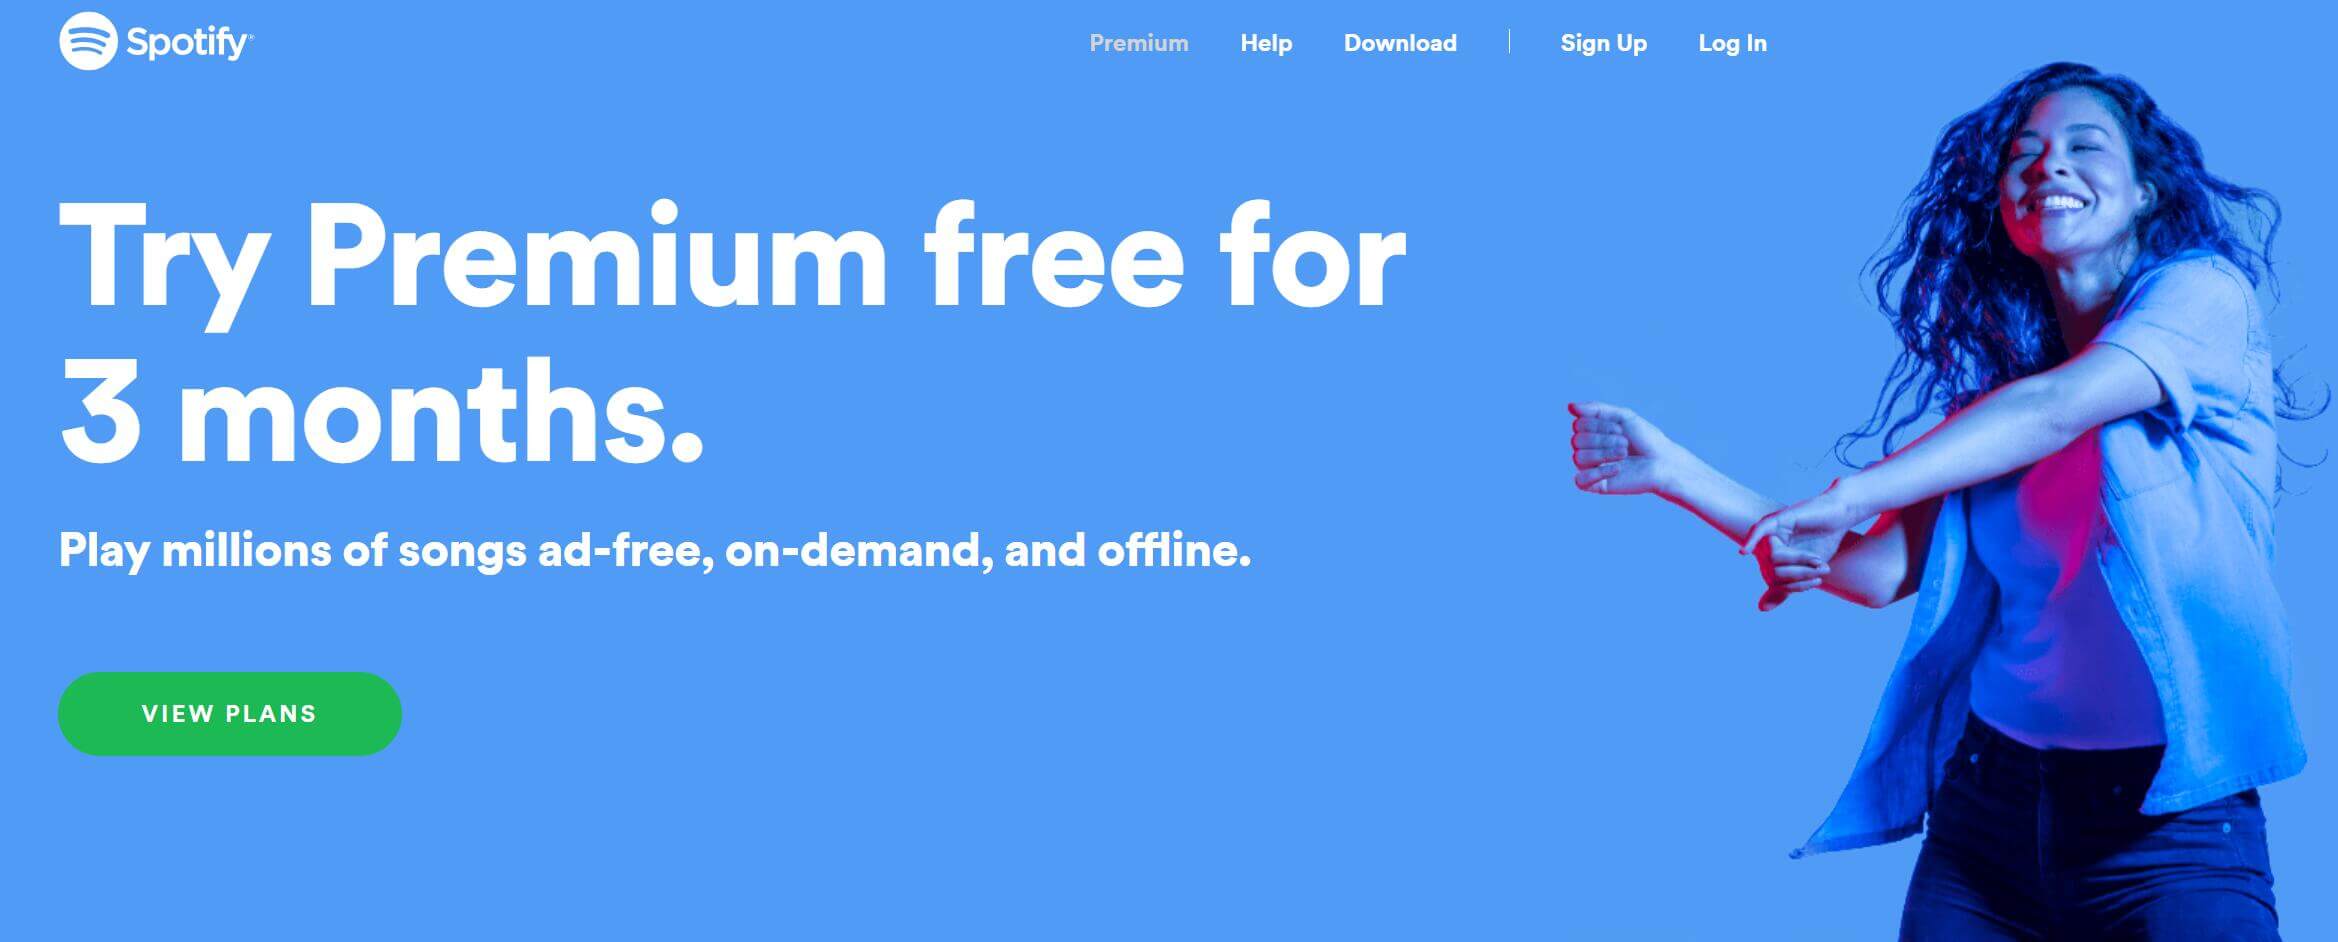 sign up spotify premium